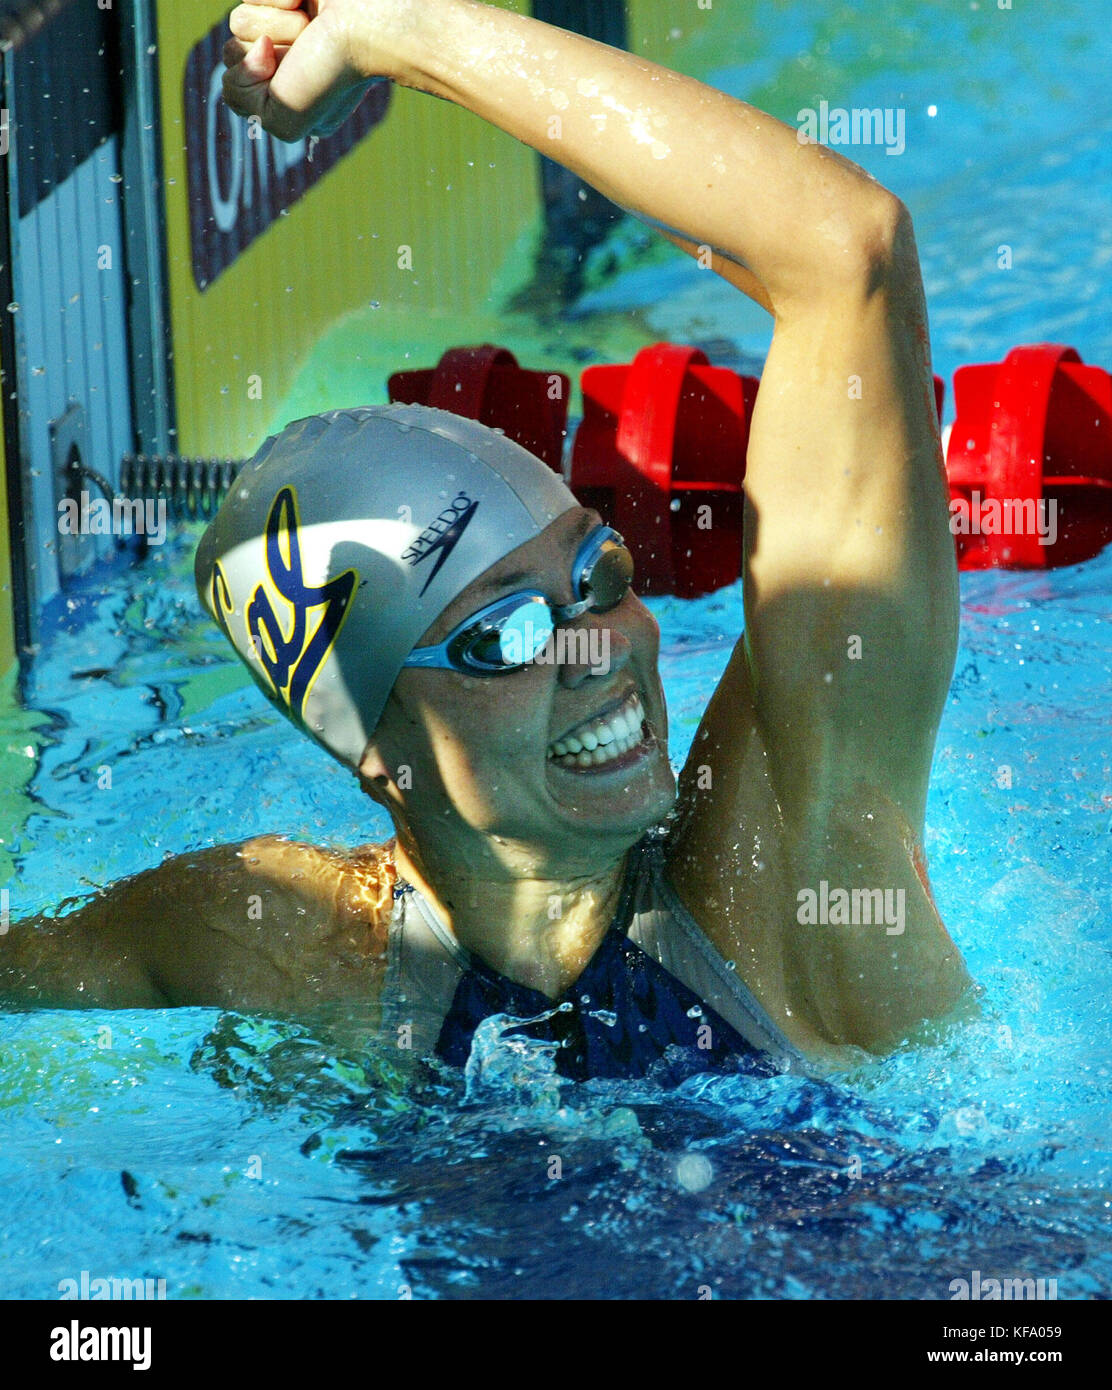 US swimmer Natalie Coughlin celebrates her victory in  the women's 100 meter backstroke at the U.S. Olympic Swimming Trials in Long Beach, California on 09 July 2004. Coughlin won in a time of 59.85. Photo by Francis Specker Stock Photo